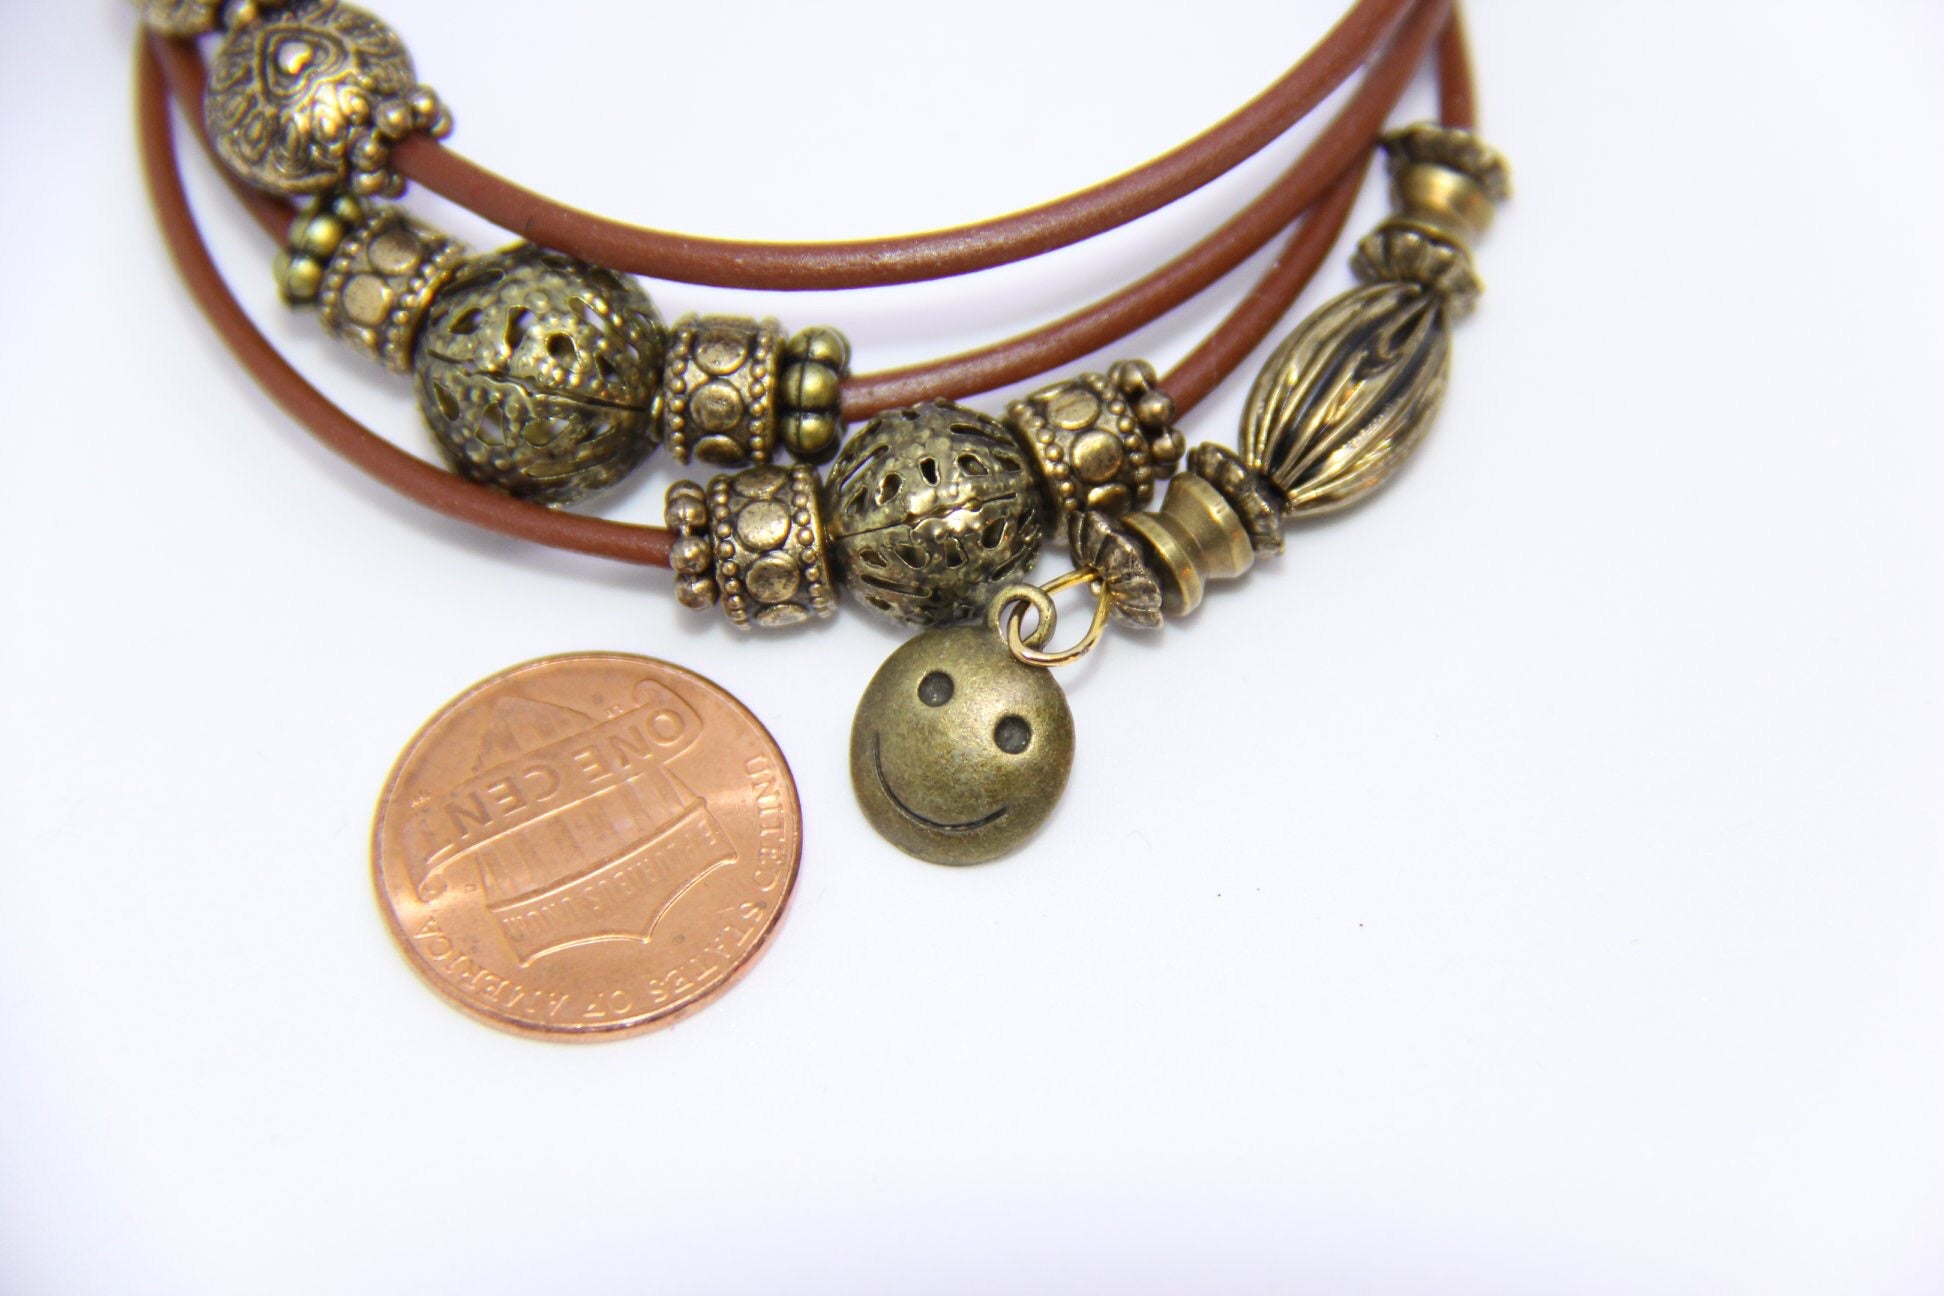 Brown leather memory wire bracelet